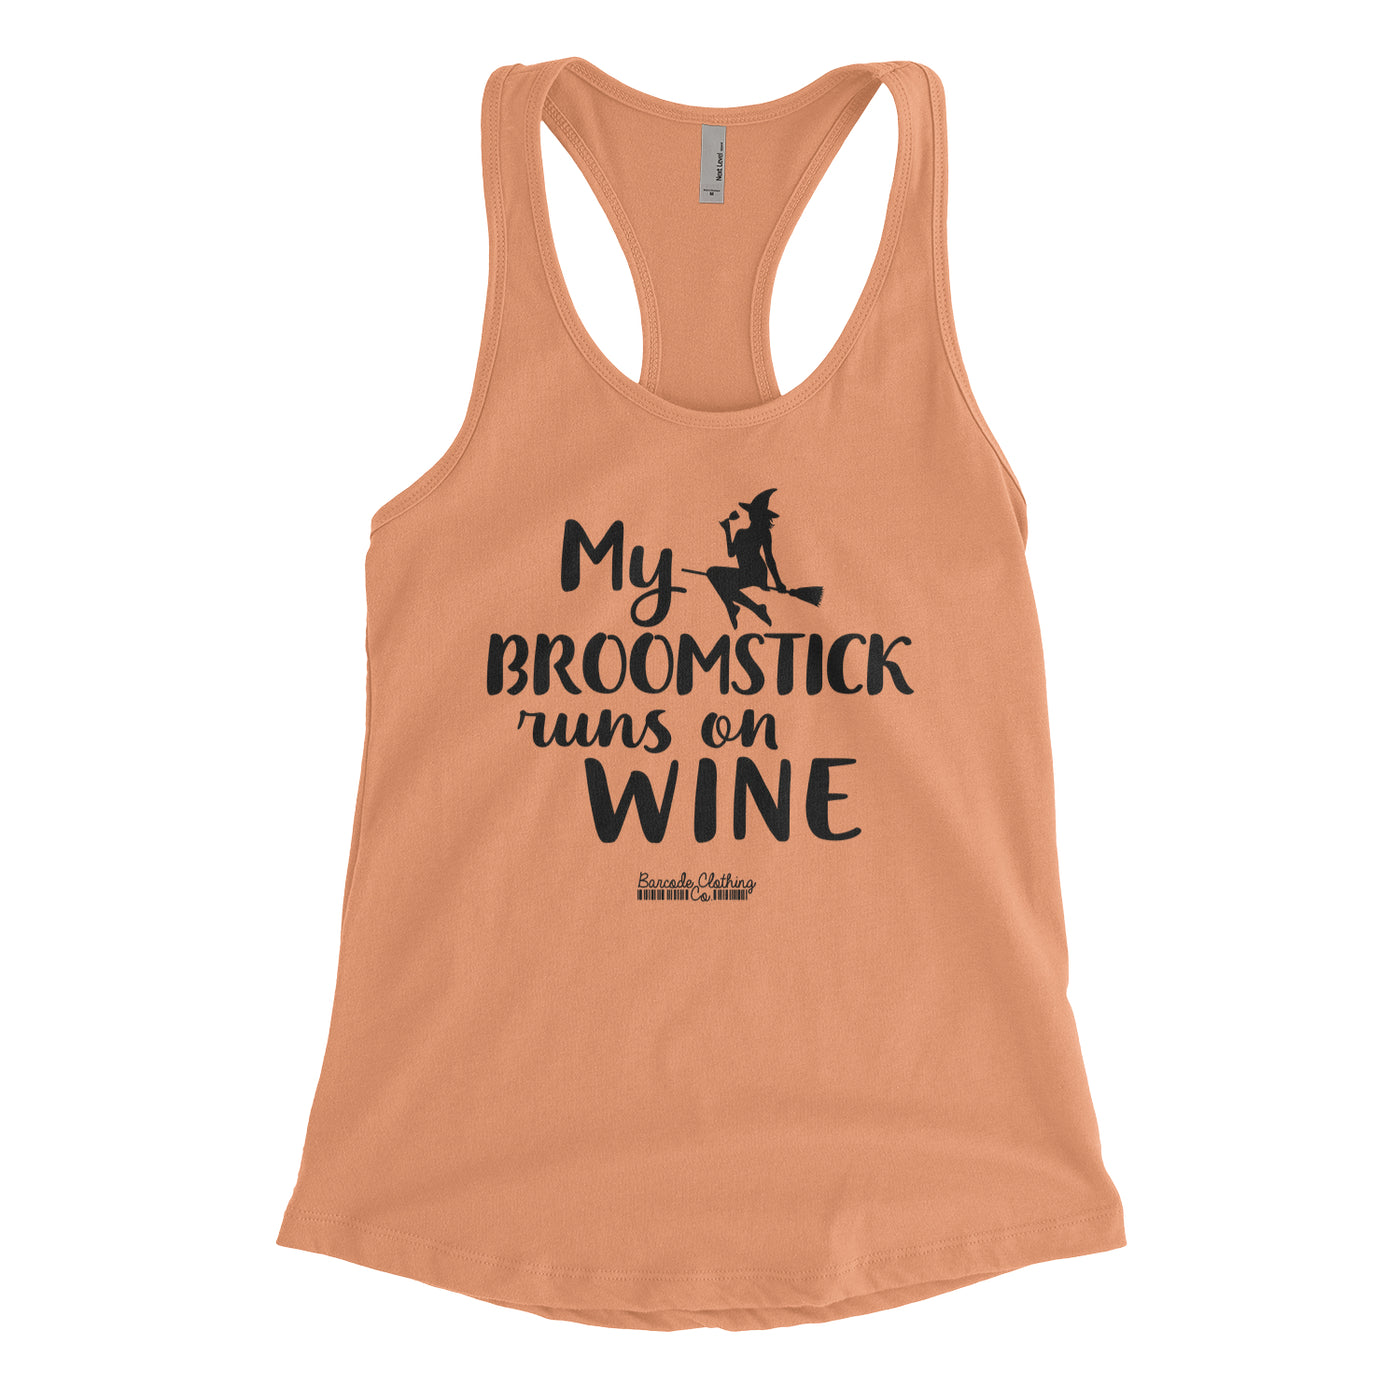 Broomstick Wine Blacked Out